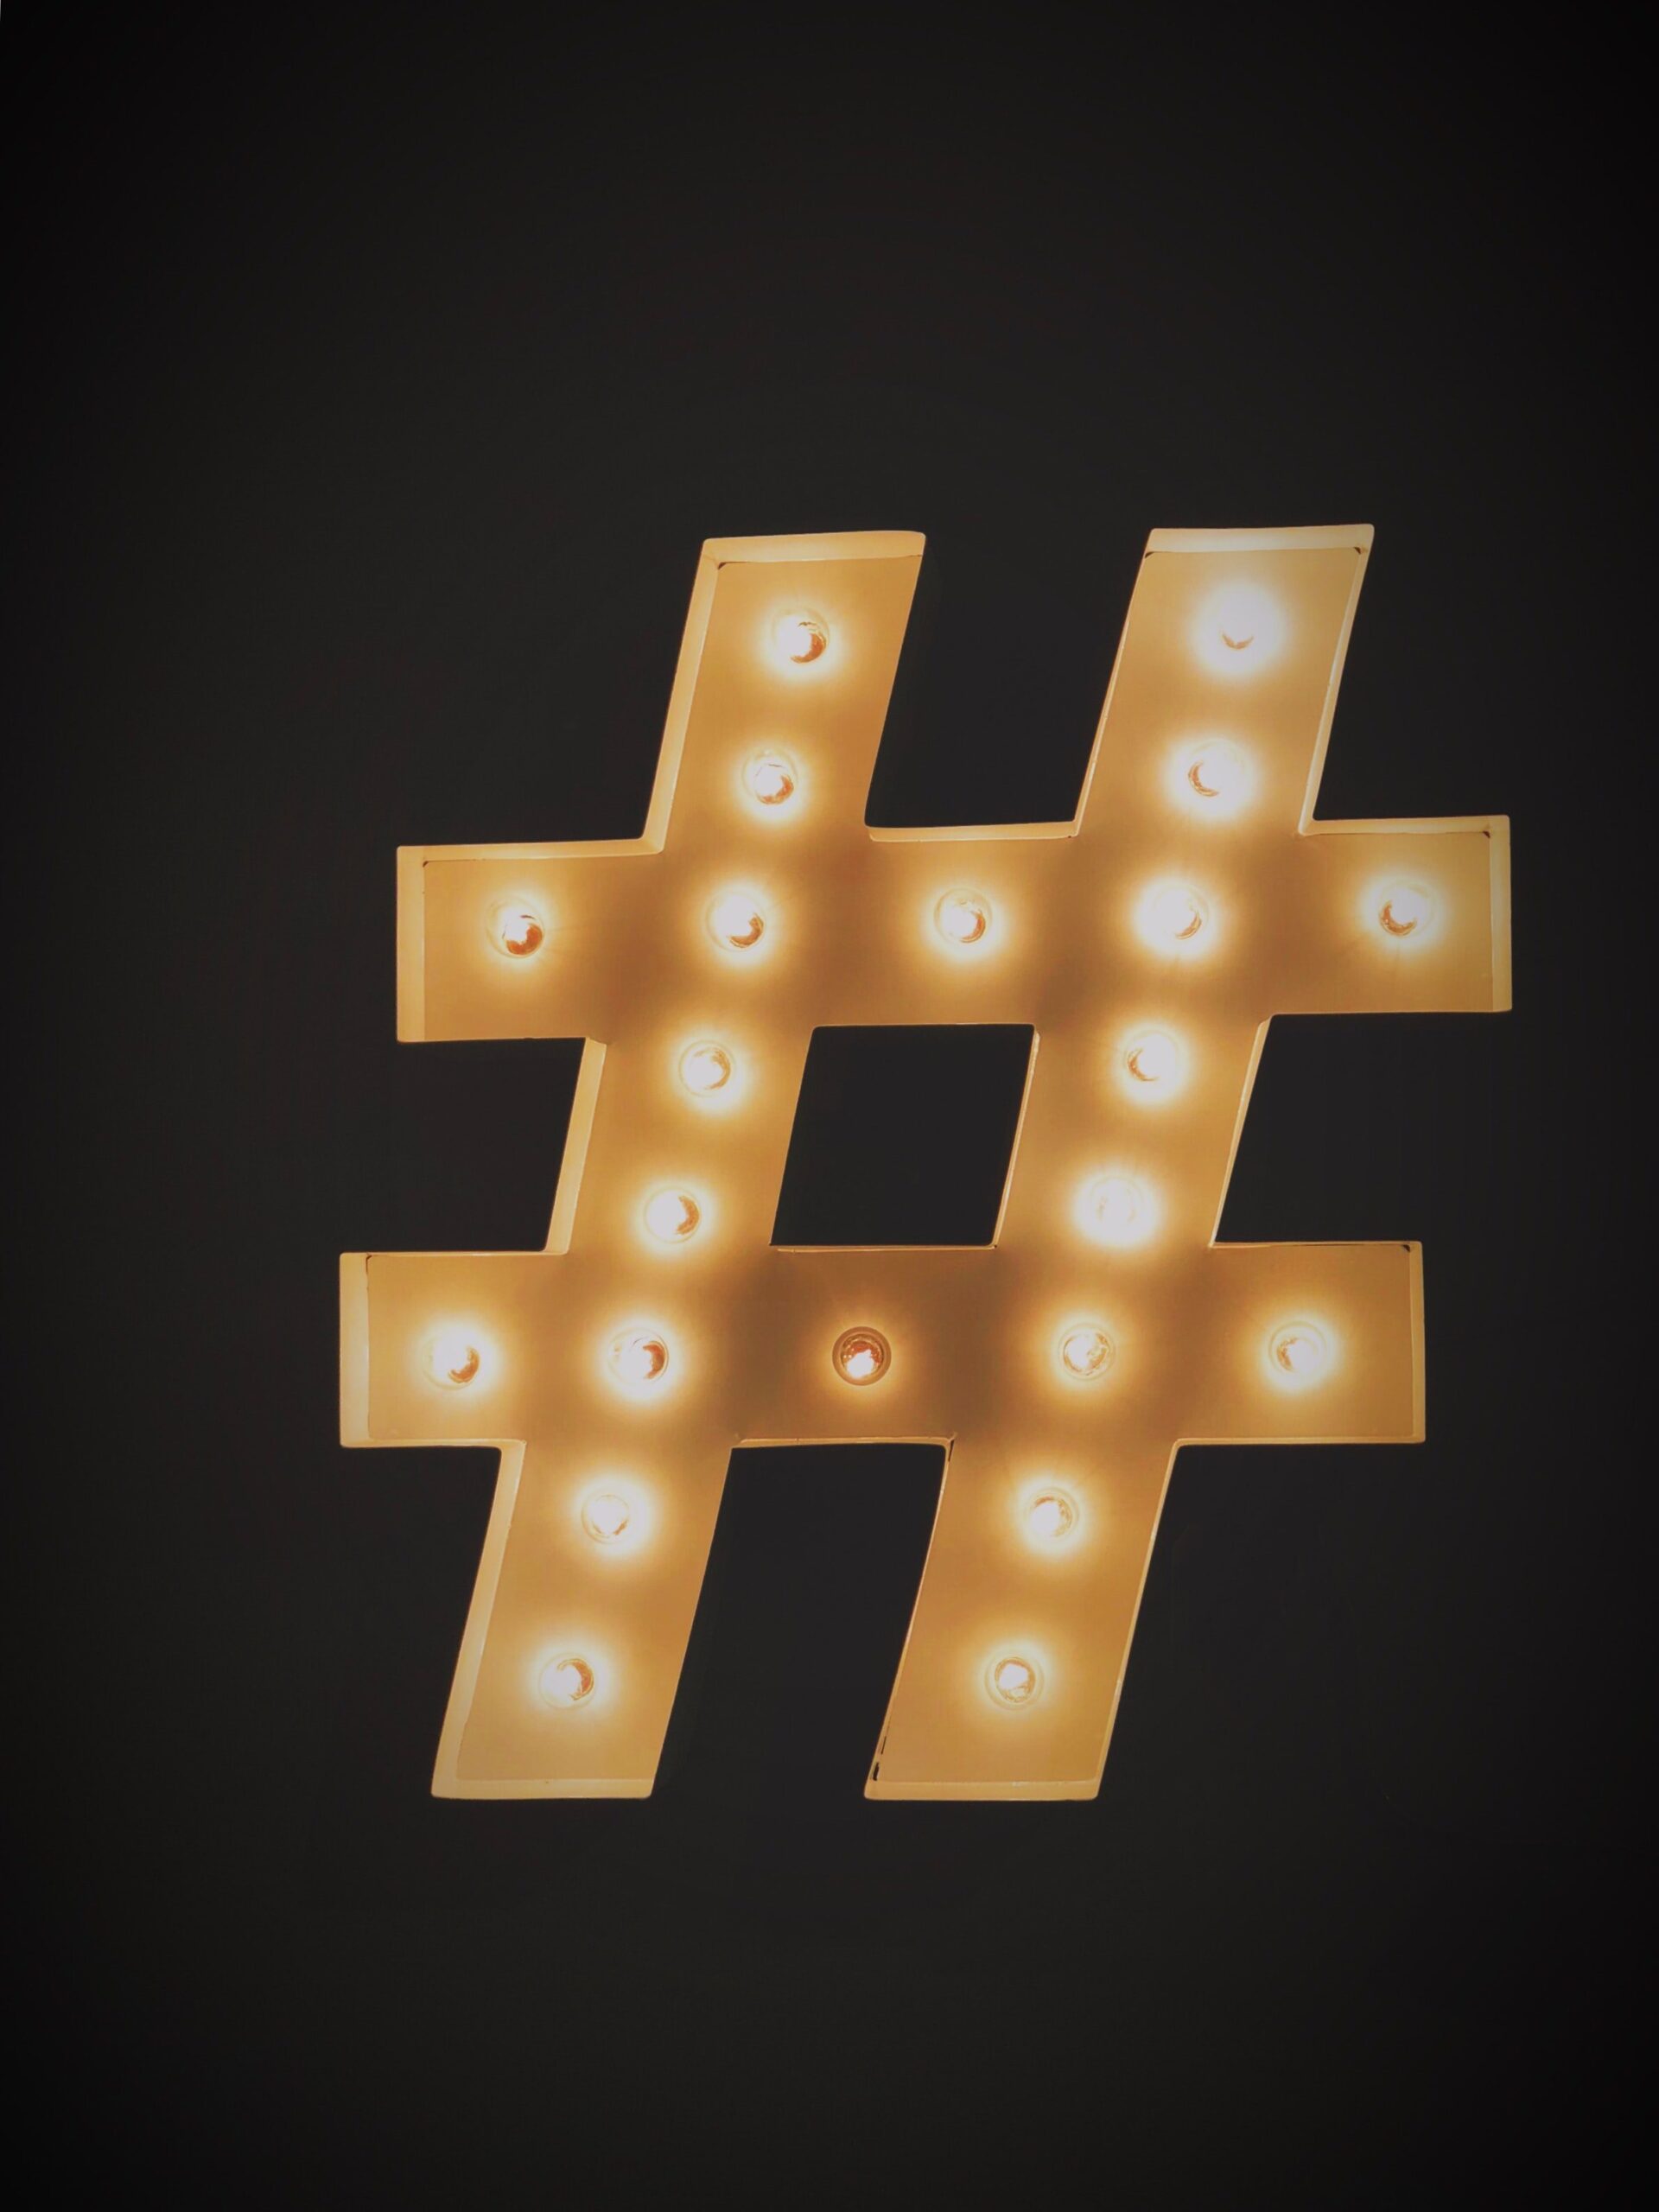 #Hashtag this – a guide to using post captions